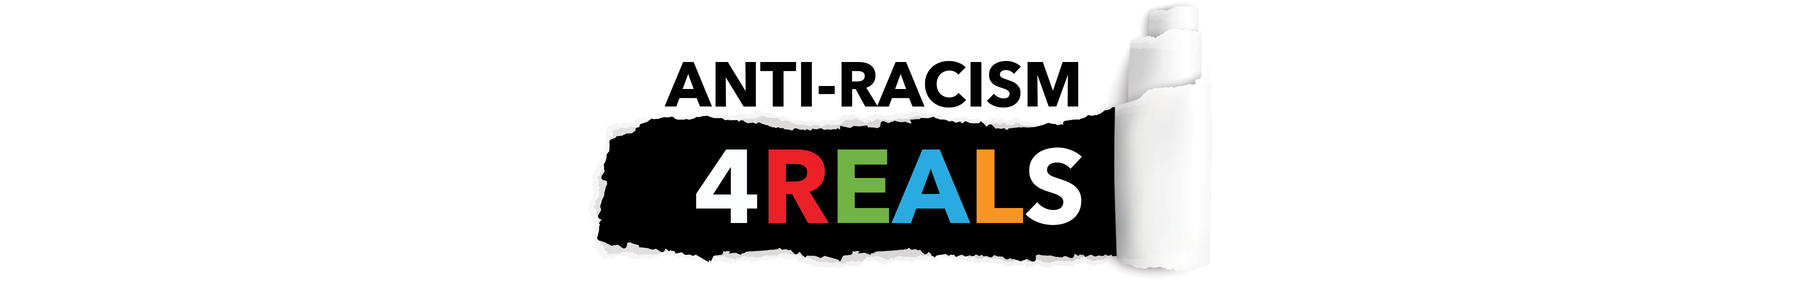 Why We're Publishing "Anti-Racism 4REALS"